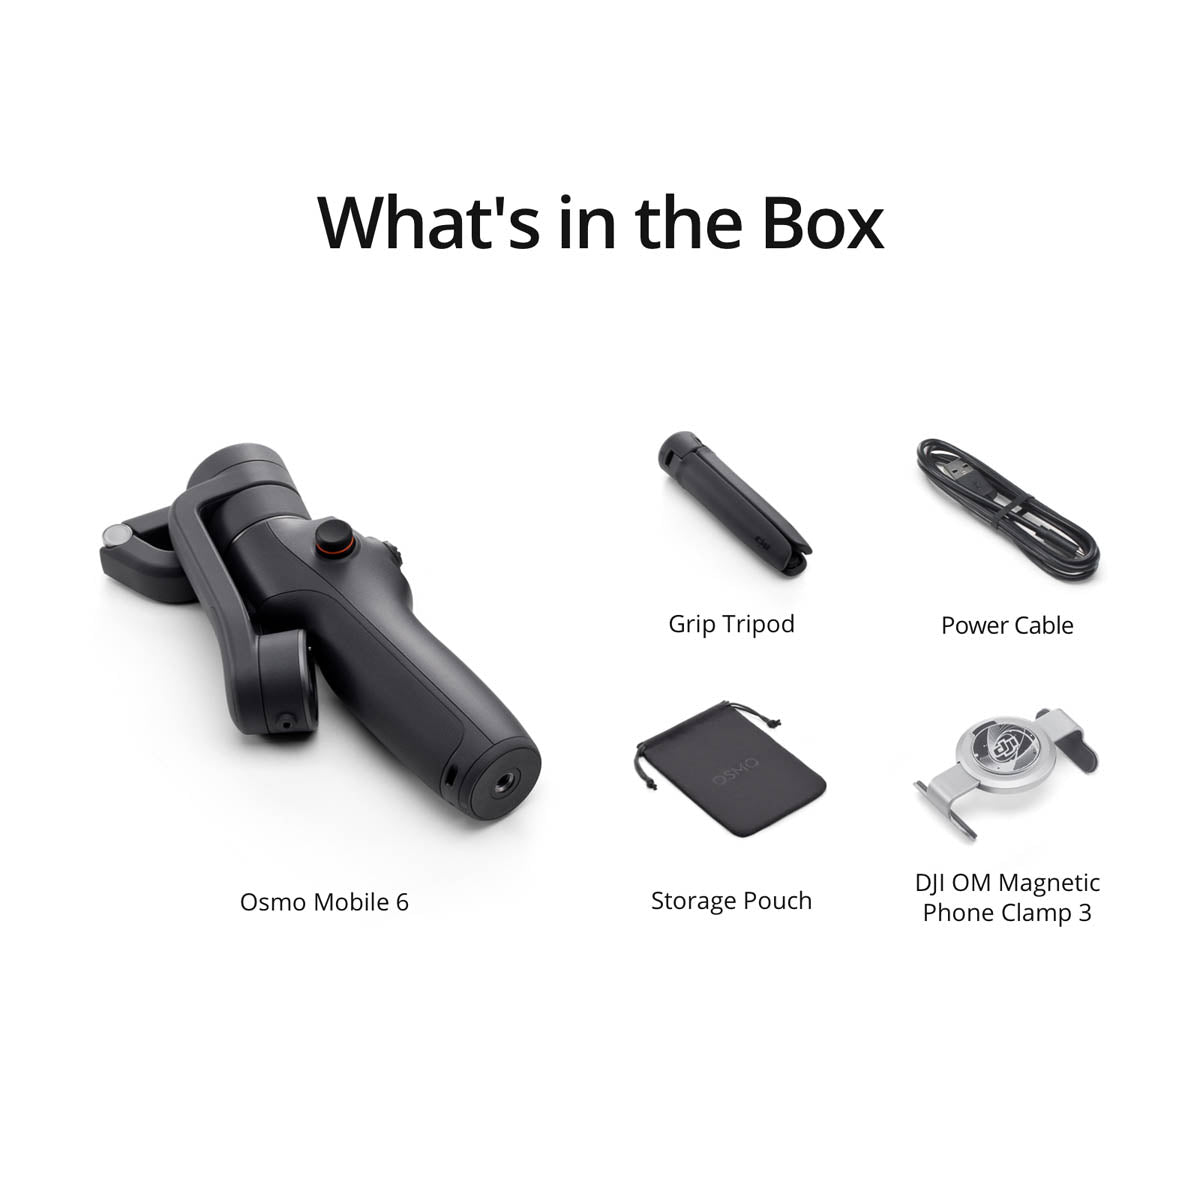 DJI Osmo Mobile 6 Smartphone Gimbal Stabilizer Extension Rod Android &